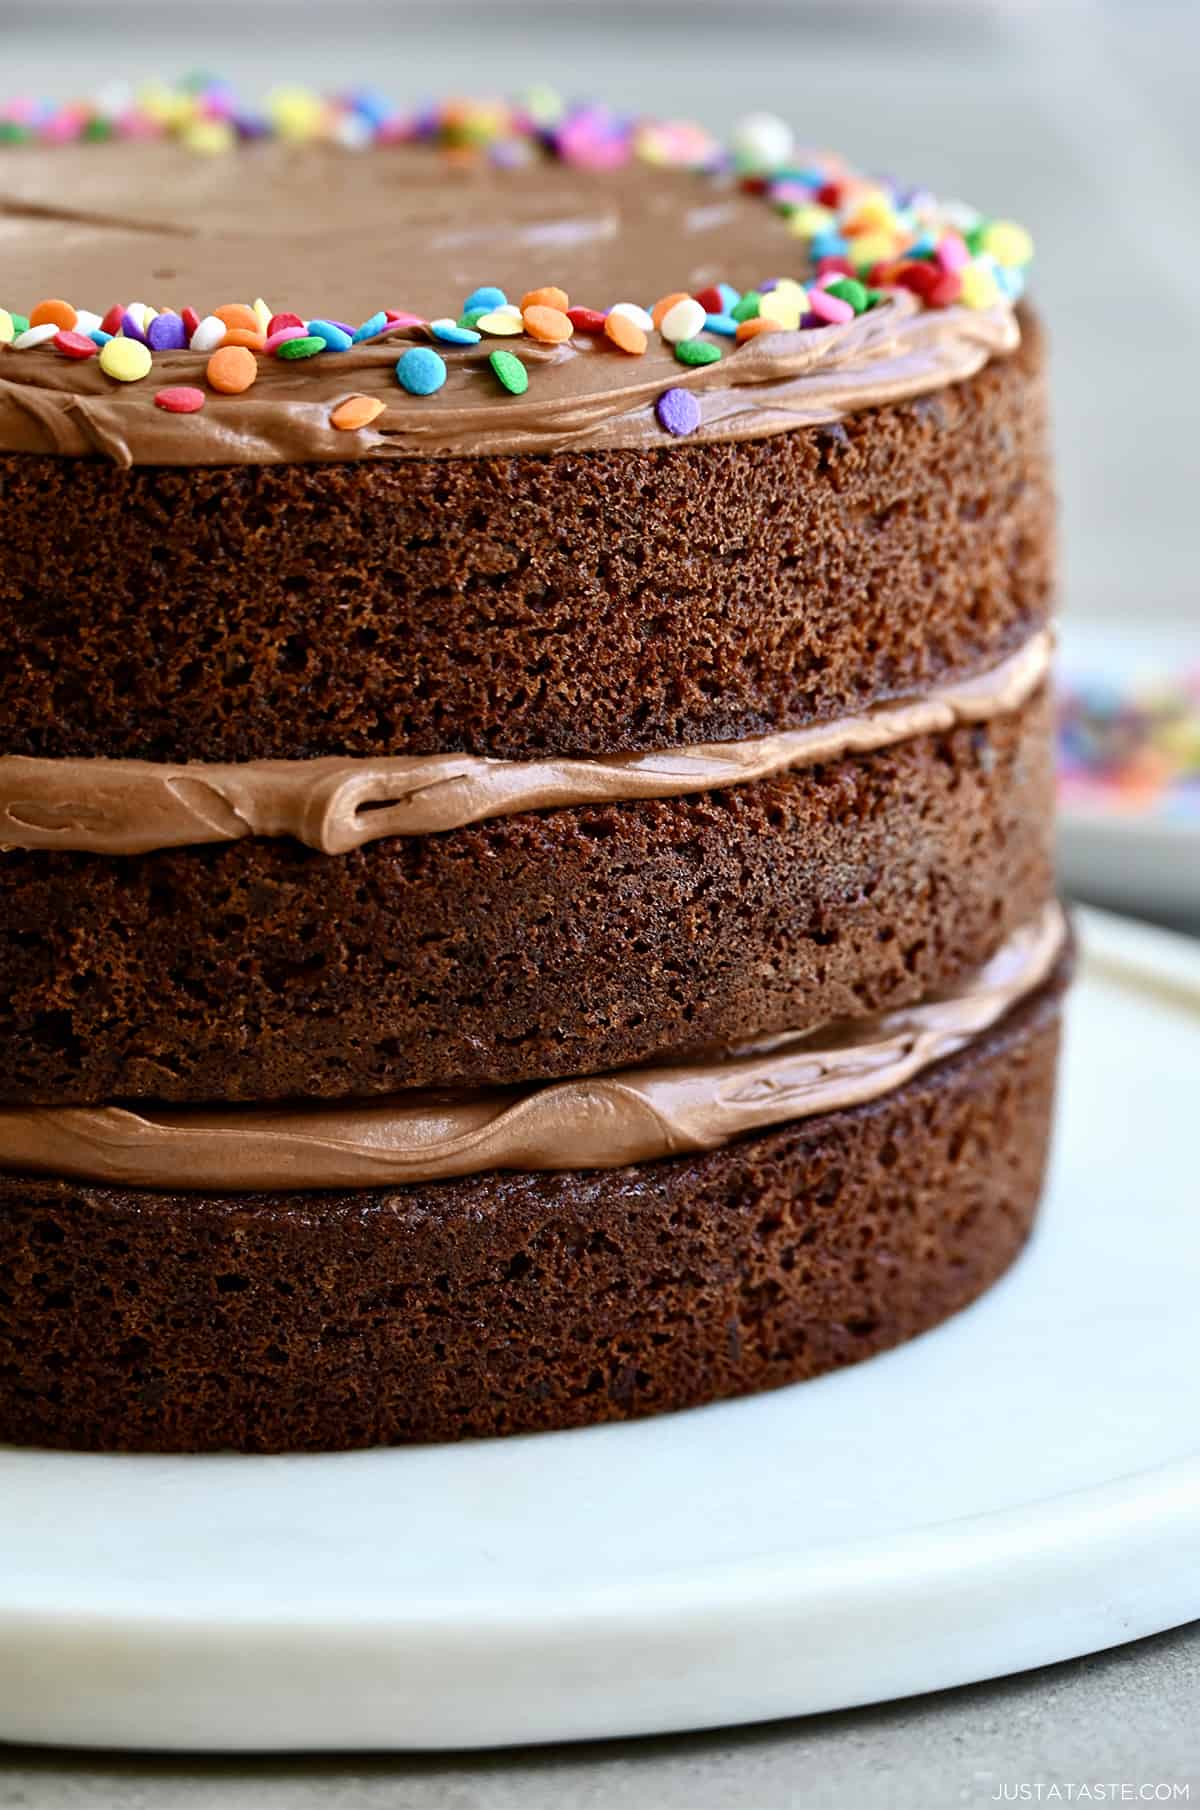 A three-tiered chocolate cake with coffee buttercream frosting and rainbow sprinkles on a round serving platter.